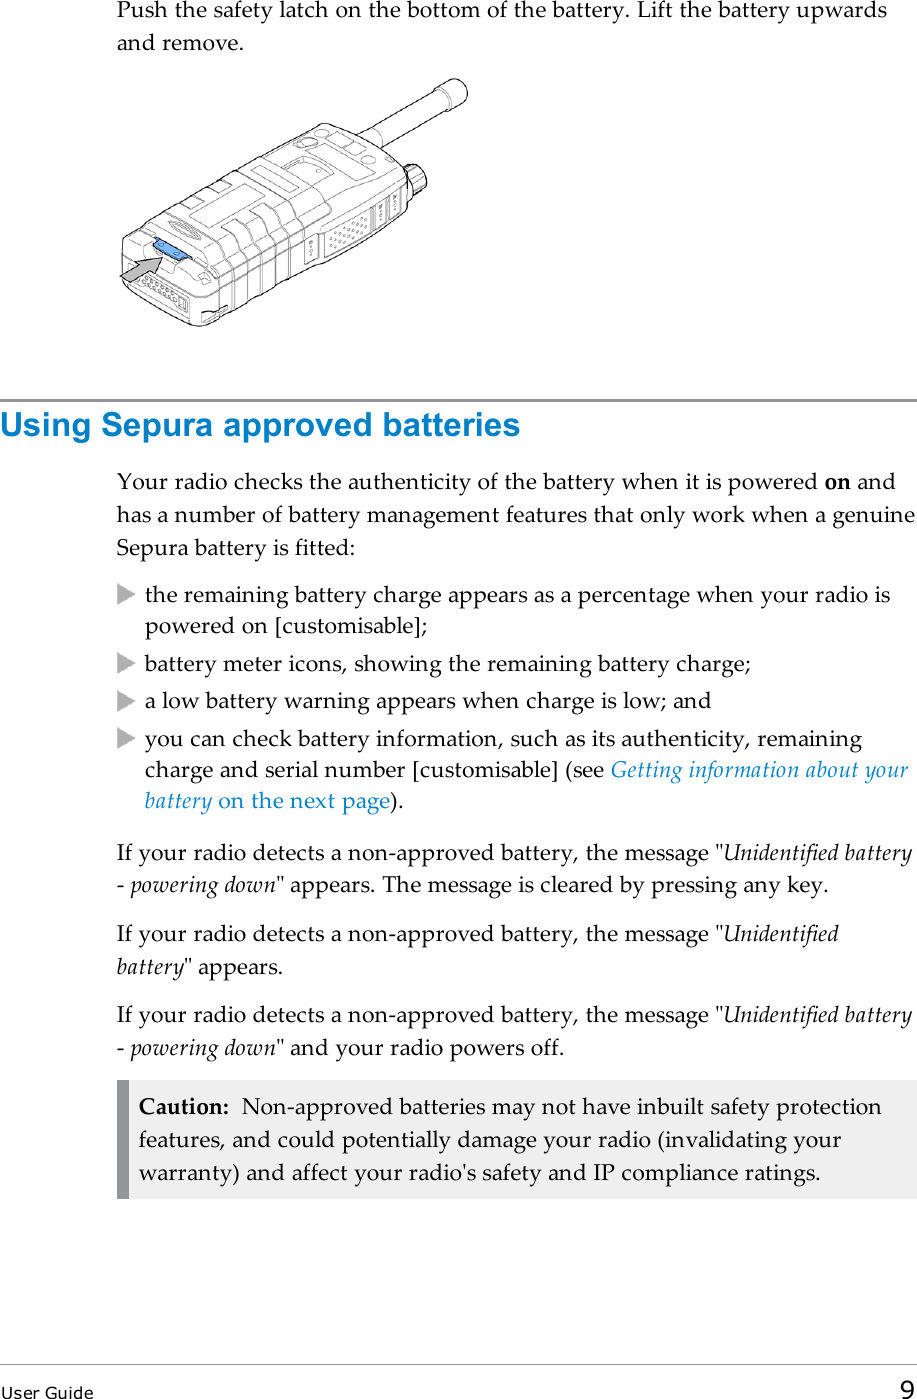 Push the safety latch on the bottom of the battery. Lift the battery upwardsand remove.Using Sepura approved batteriesYour radio checks the authenticity of the battery when it is powered on andhas a number of battery management features that only work when a genuineSepura battery is fitted:the remaining battery charge appears as a percentage when your radio ispowered on [customisable];battery meter icons, showing the remaining battery charge;a low battery warning appears when charge is low; andyou can check battery information, such as its authenticity, remainingcharge and serial number [customisable] (see Getting information about yourbattery on the next page).If your radio detects a non-approved battery, the message &quot;Unidentified battery-powering down&quot; appears. The message is cleared by pressing any key.If your radio detects a non-approved battery, the message &quot;Unidentifiedbattery&quot; appears.If your radio detects a non-approved battery, the message &quot;Unidentified battery-powering down&quot; and your radio powers off.Caution: Non-approved batteries may not have inbuilt safety protectionfeatures, and could potentially damage your radio (invalidating yourwarranty) and affect your radio&apos;s safety and IP compliance ratings.User Guide 9